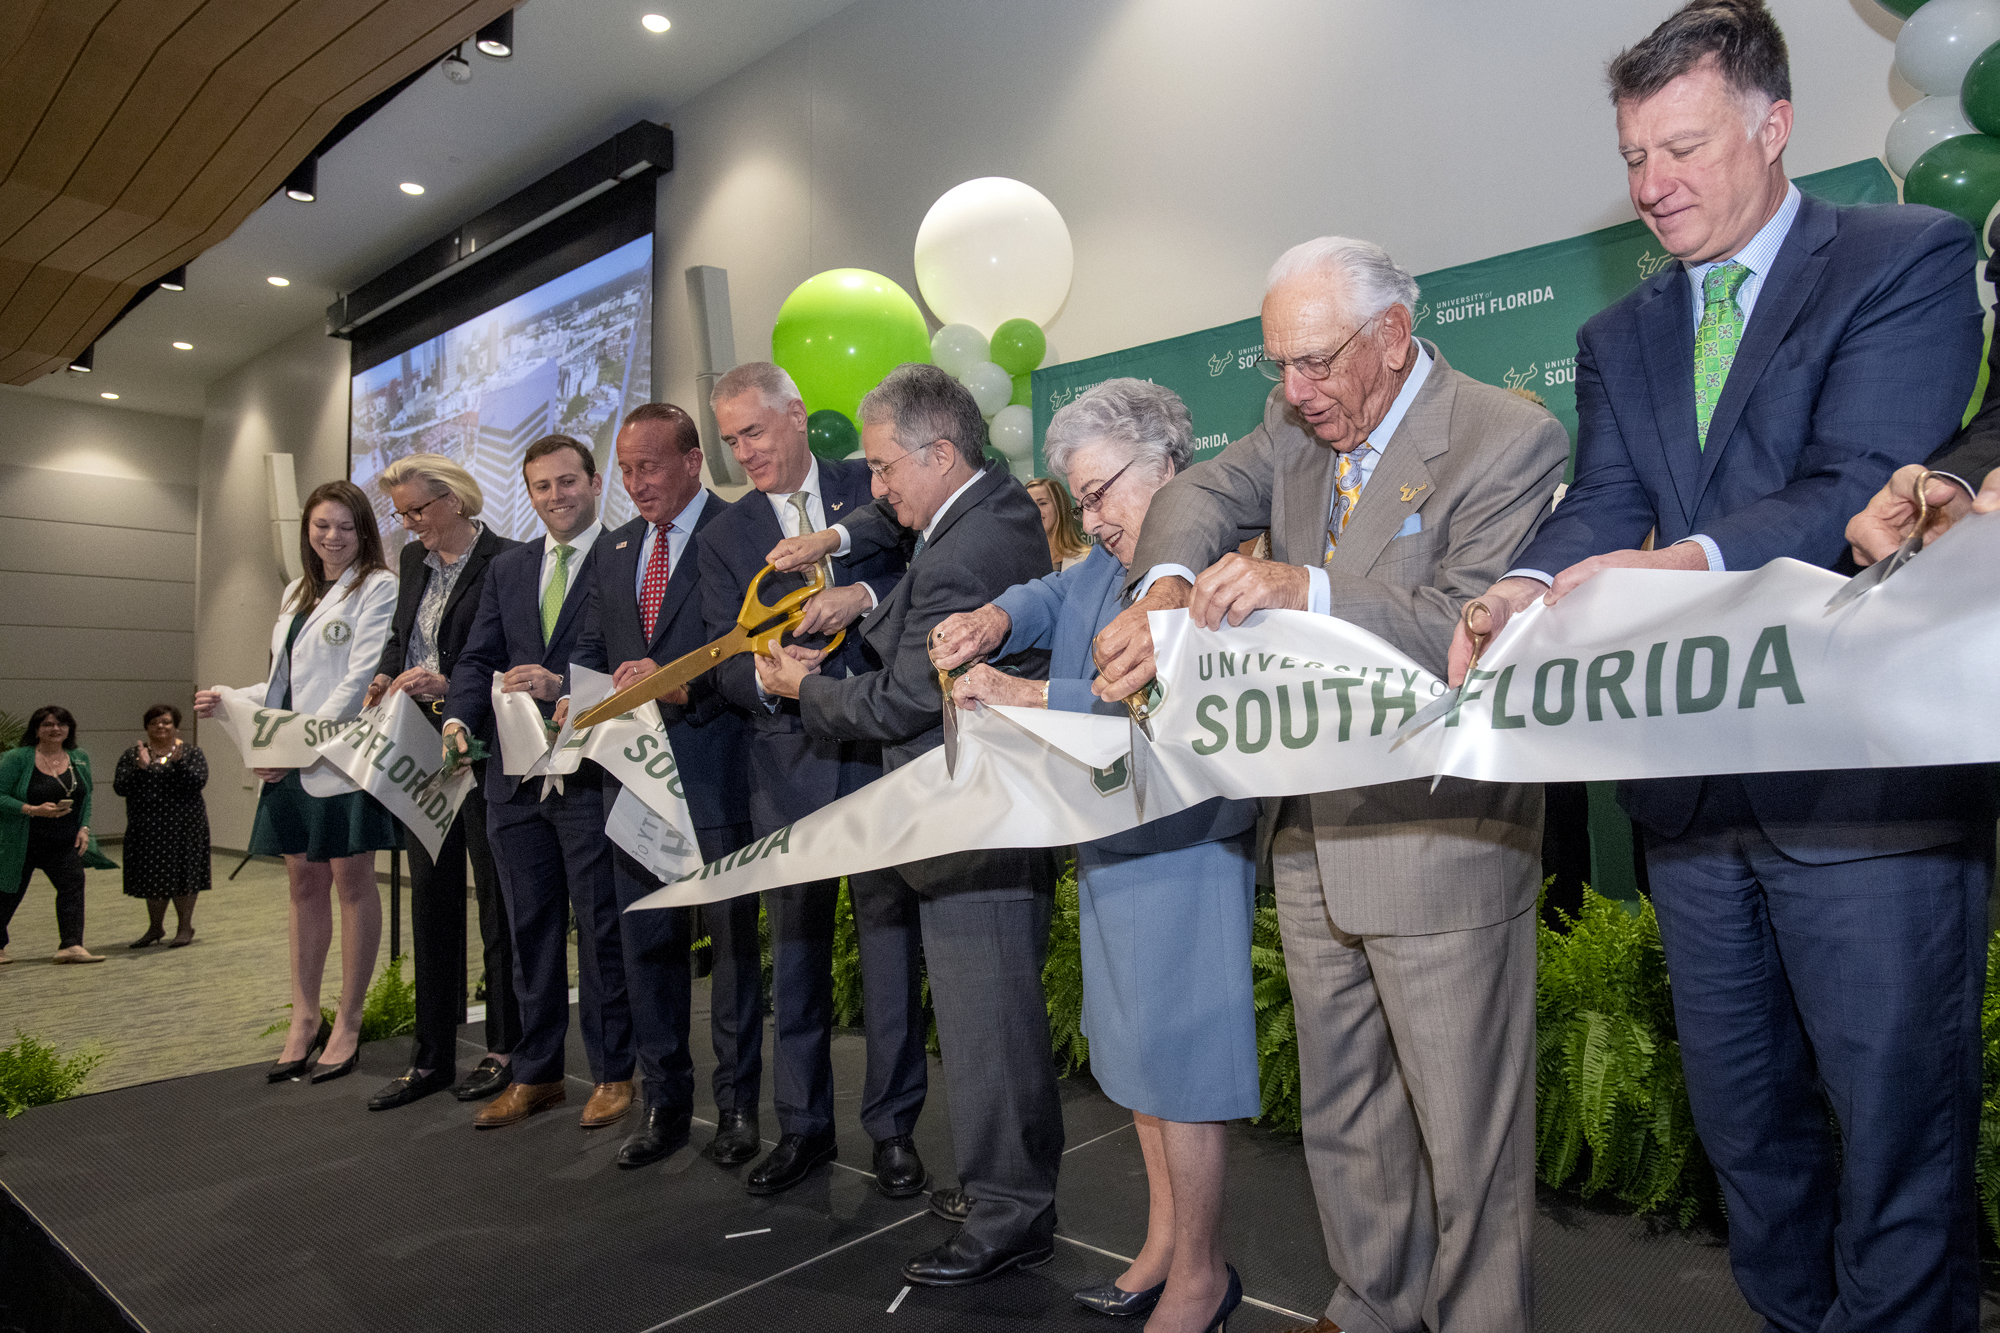 Tampa Mayor Jane Castor, second from left, helps cut the ribbon on USF Health's new Morsani College of Medicine and Heart Institute. Holding the scissors are USF President Steven Currall and USF Health leader Dr. Charles Lockwood. Courtesy photo.